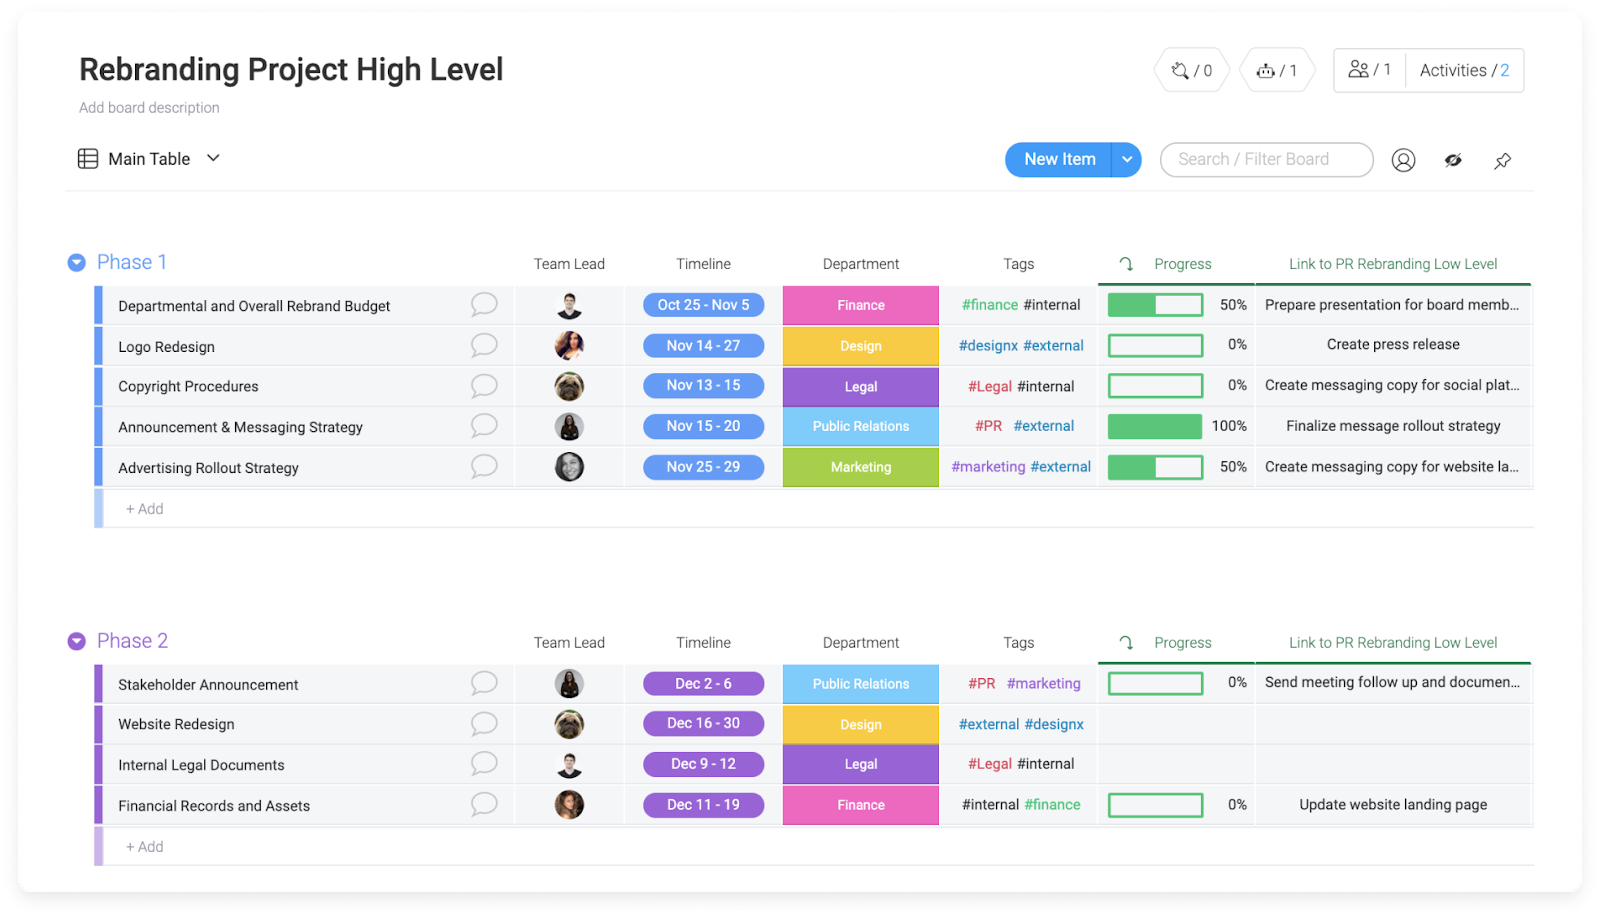 monday.com provides users with a high level project board